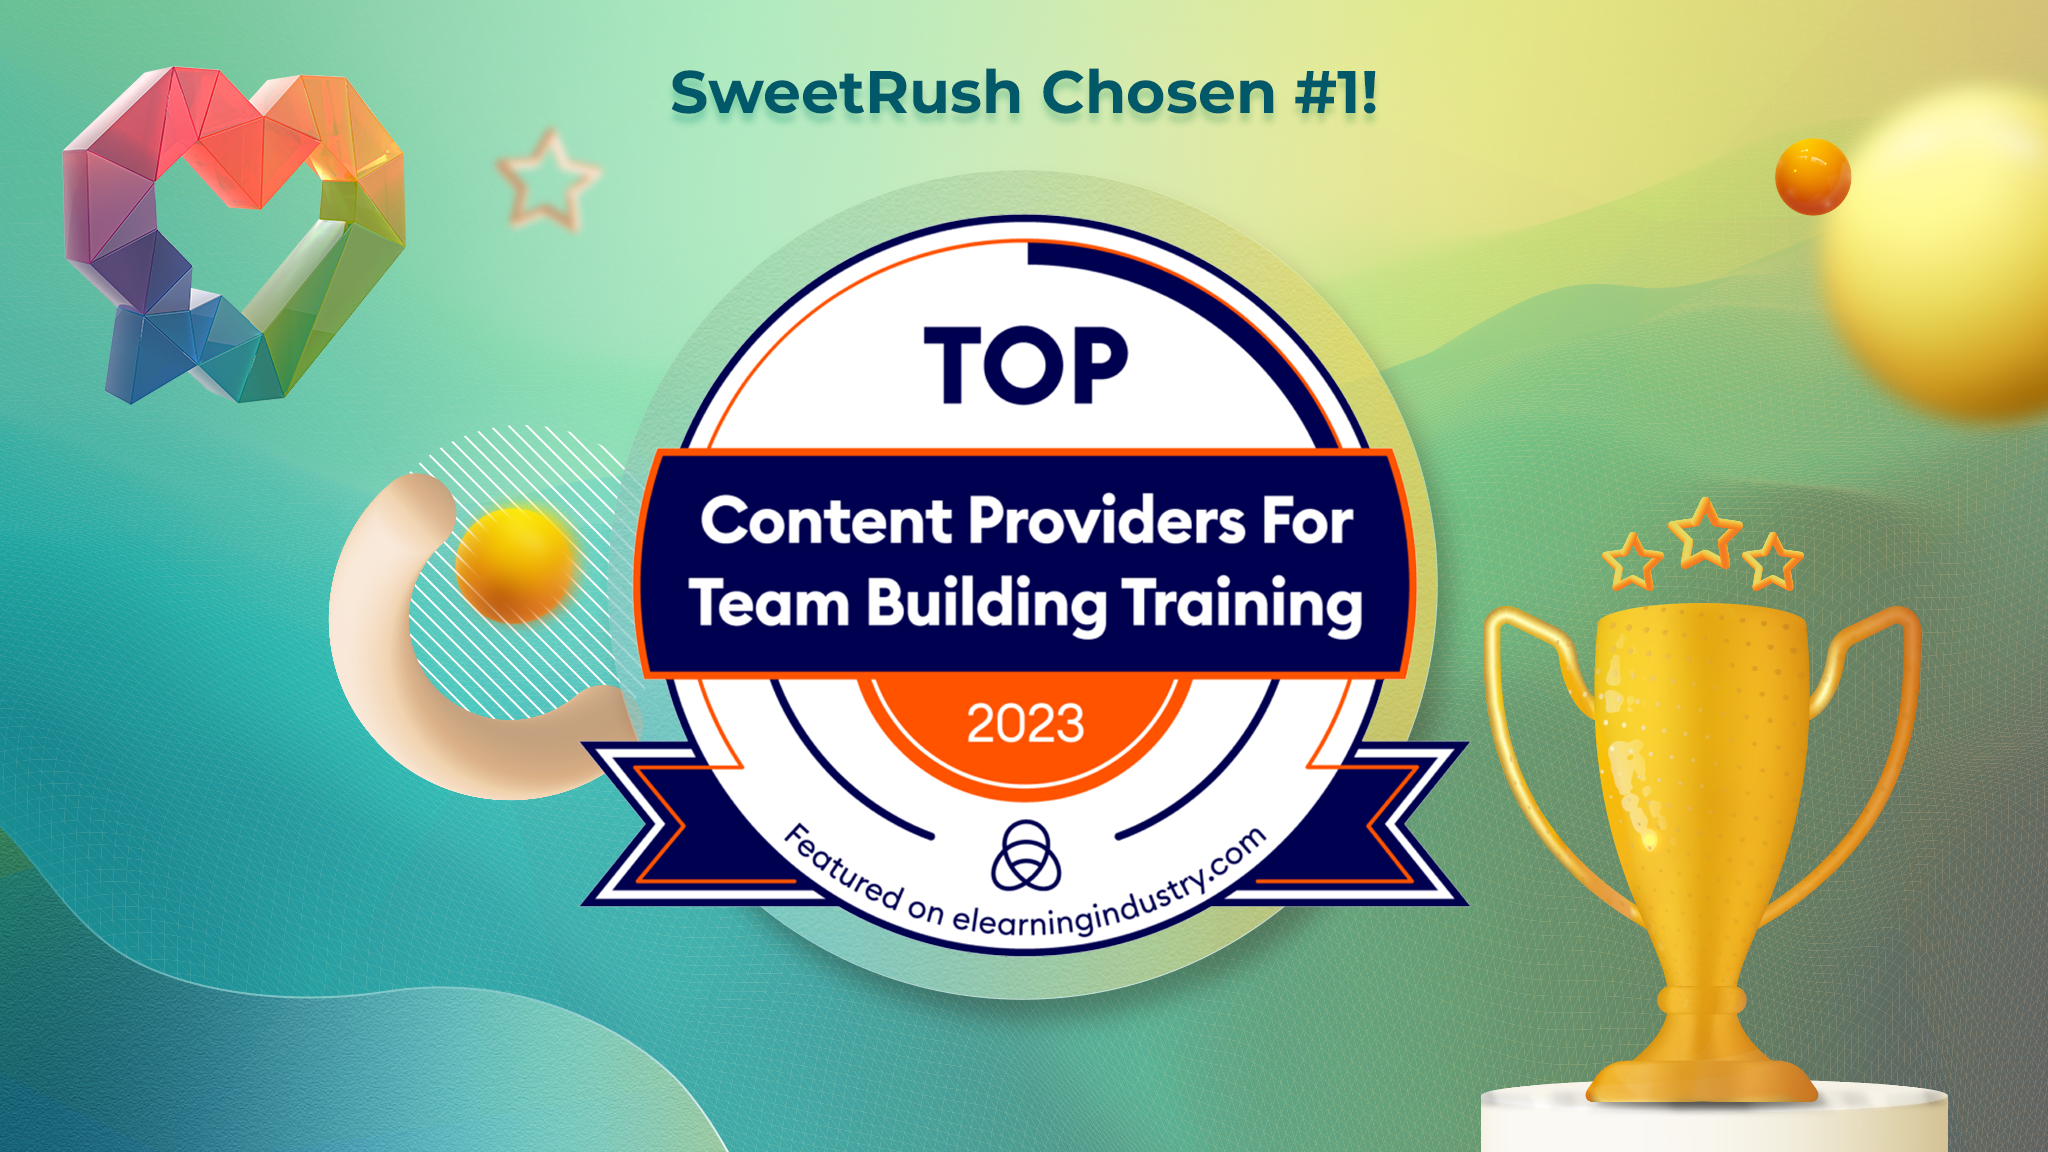 SweetRush named No. 1 Content Provider for Team Building Training